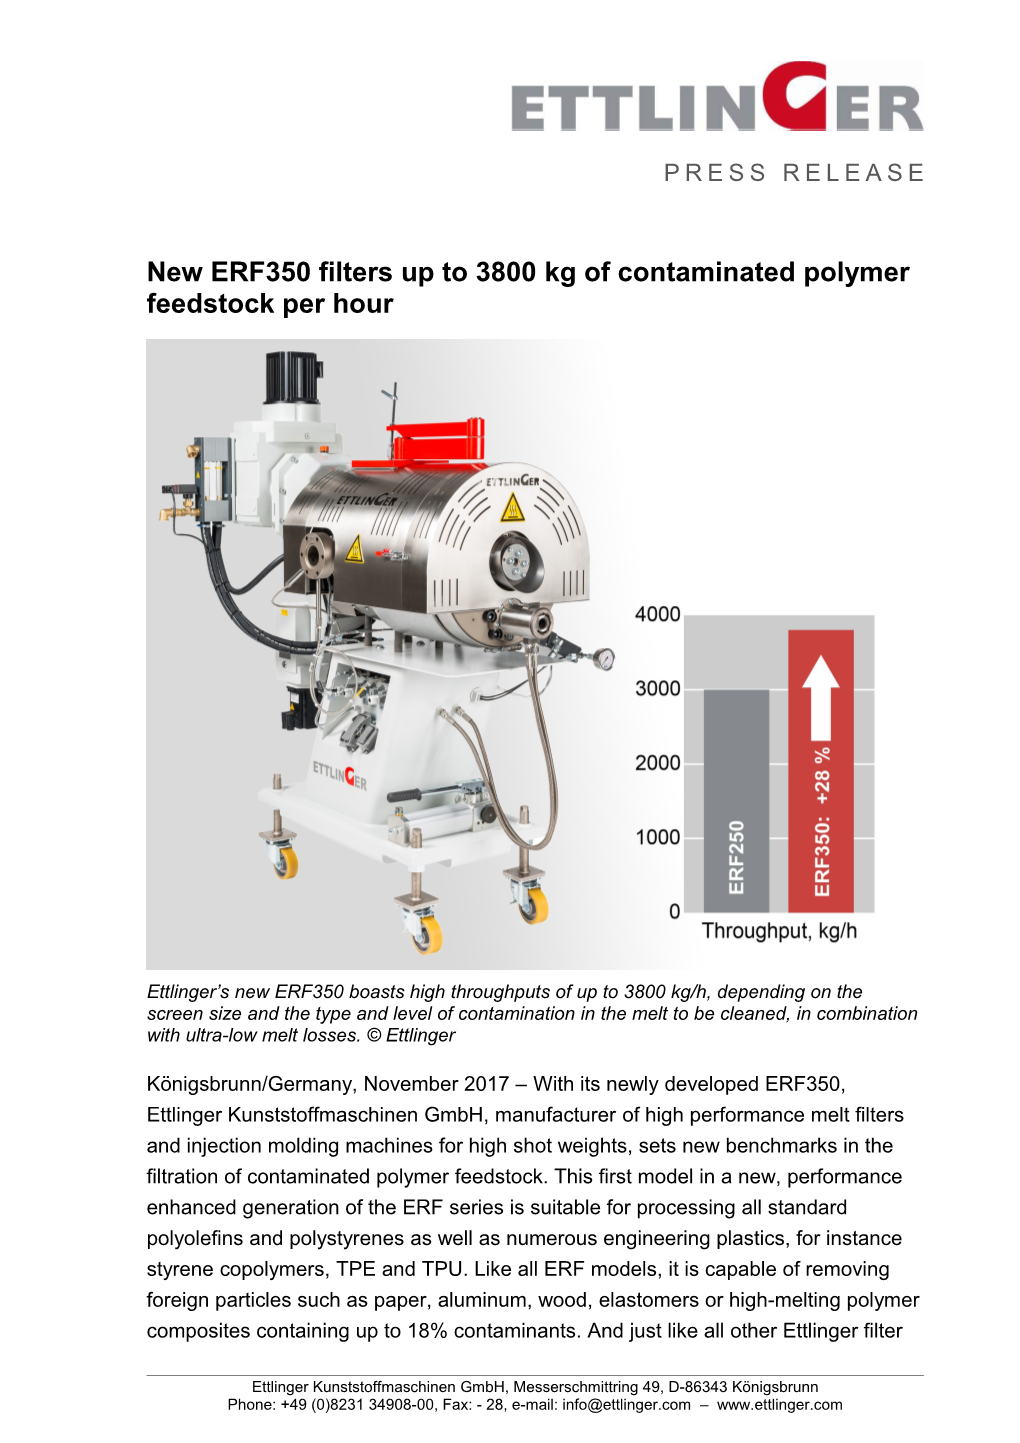 New ERF350 Filters up to 3800Kg of Contaminated Polymer Feedstock Per Hour